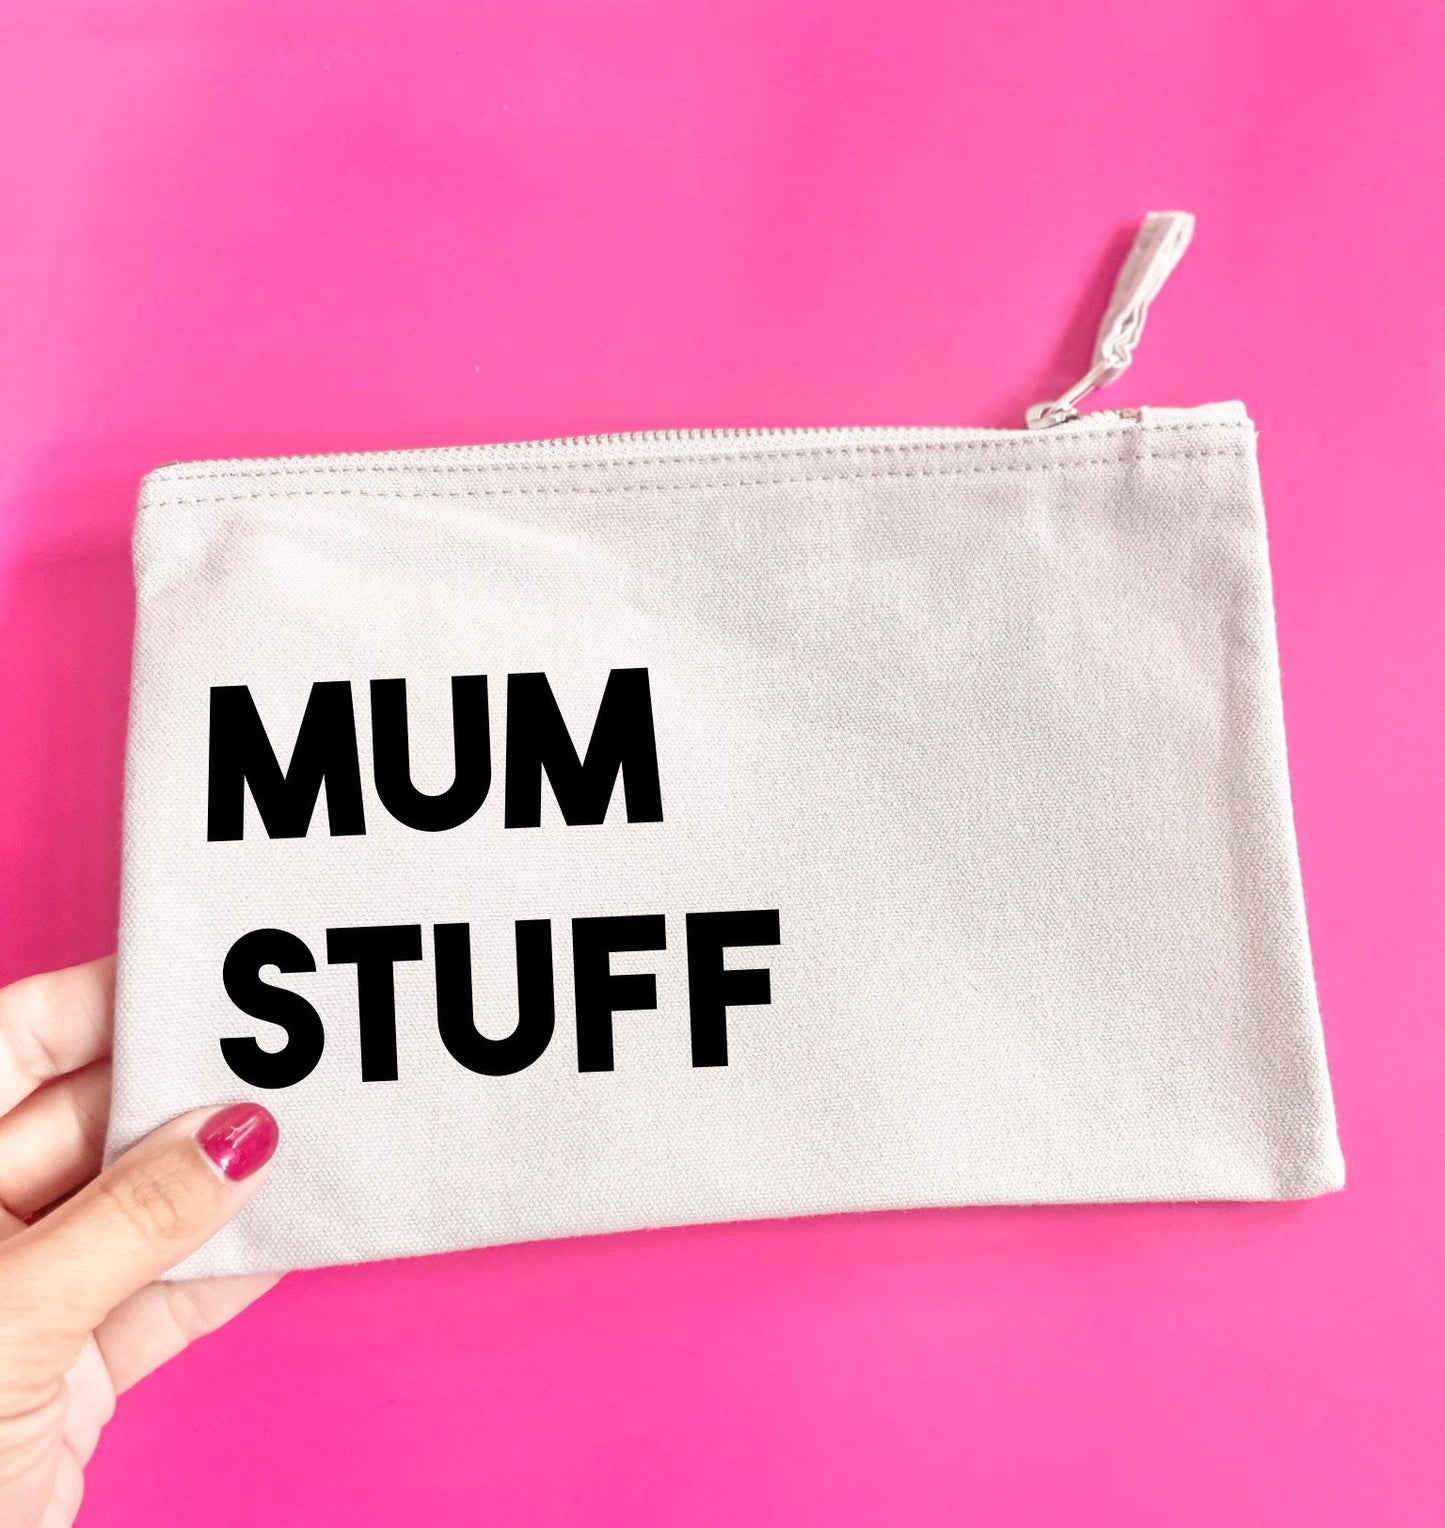 Mum Stuff Pouch, Friend, Daughter, Sister New Mum Gift, Mothers Day Gift, Gifts For Mums, Make Up Pouch, Toiletry Case, Zipped Cotton Pouch